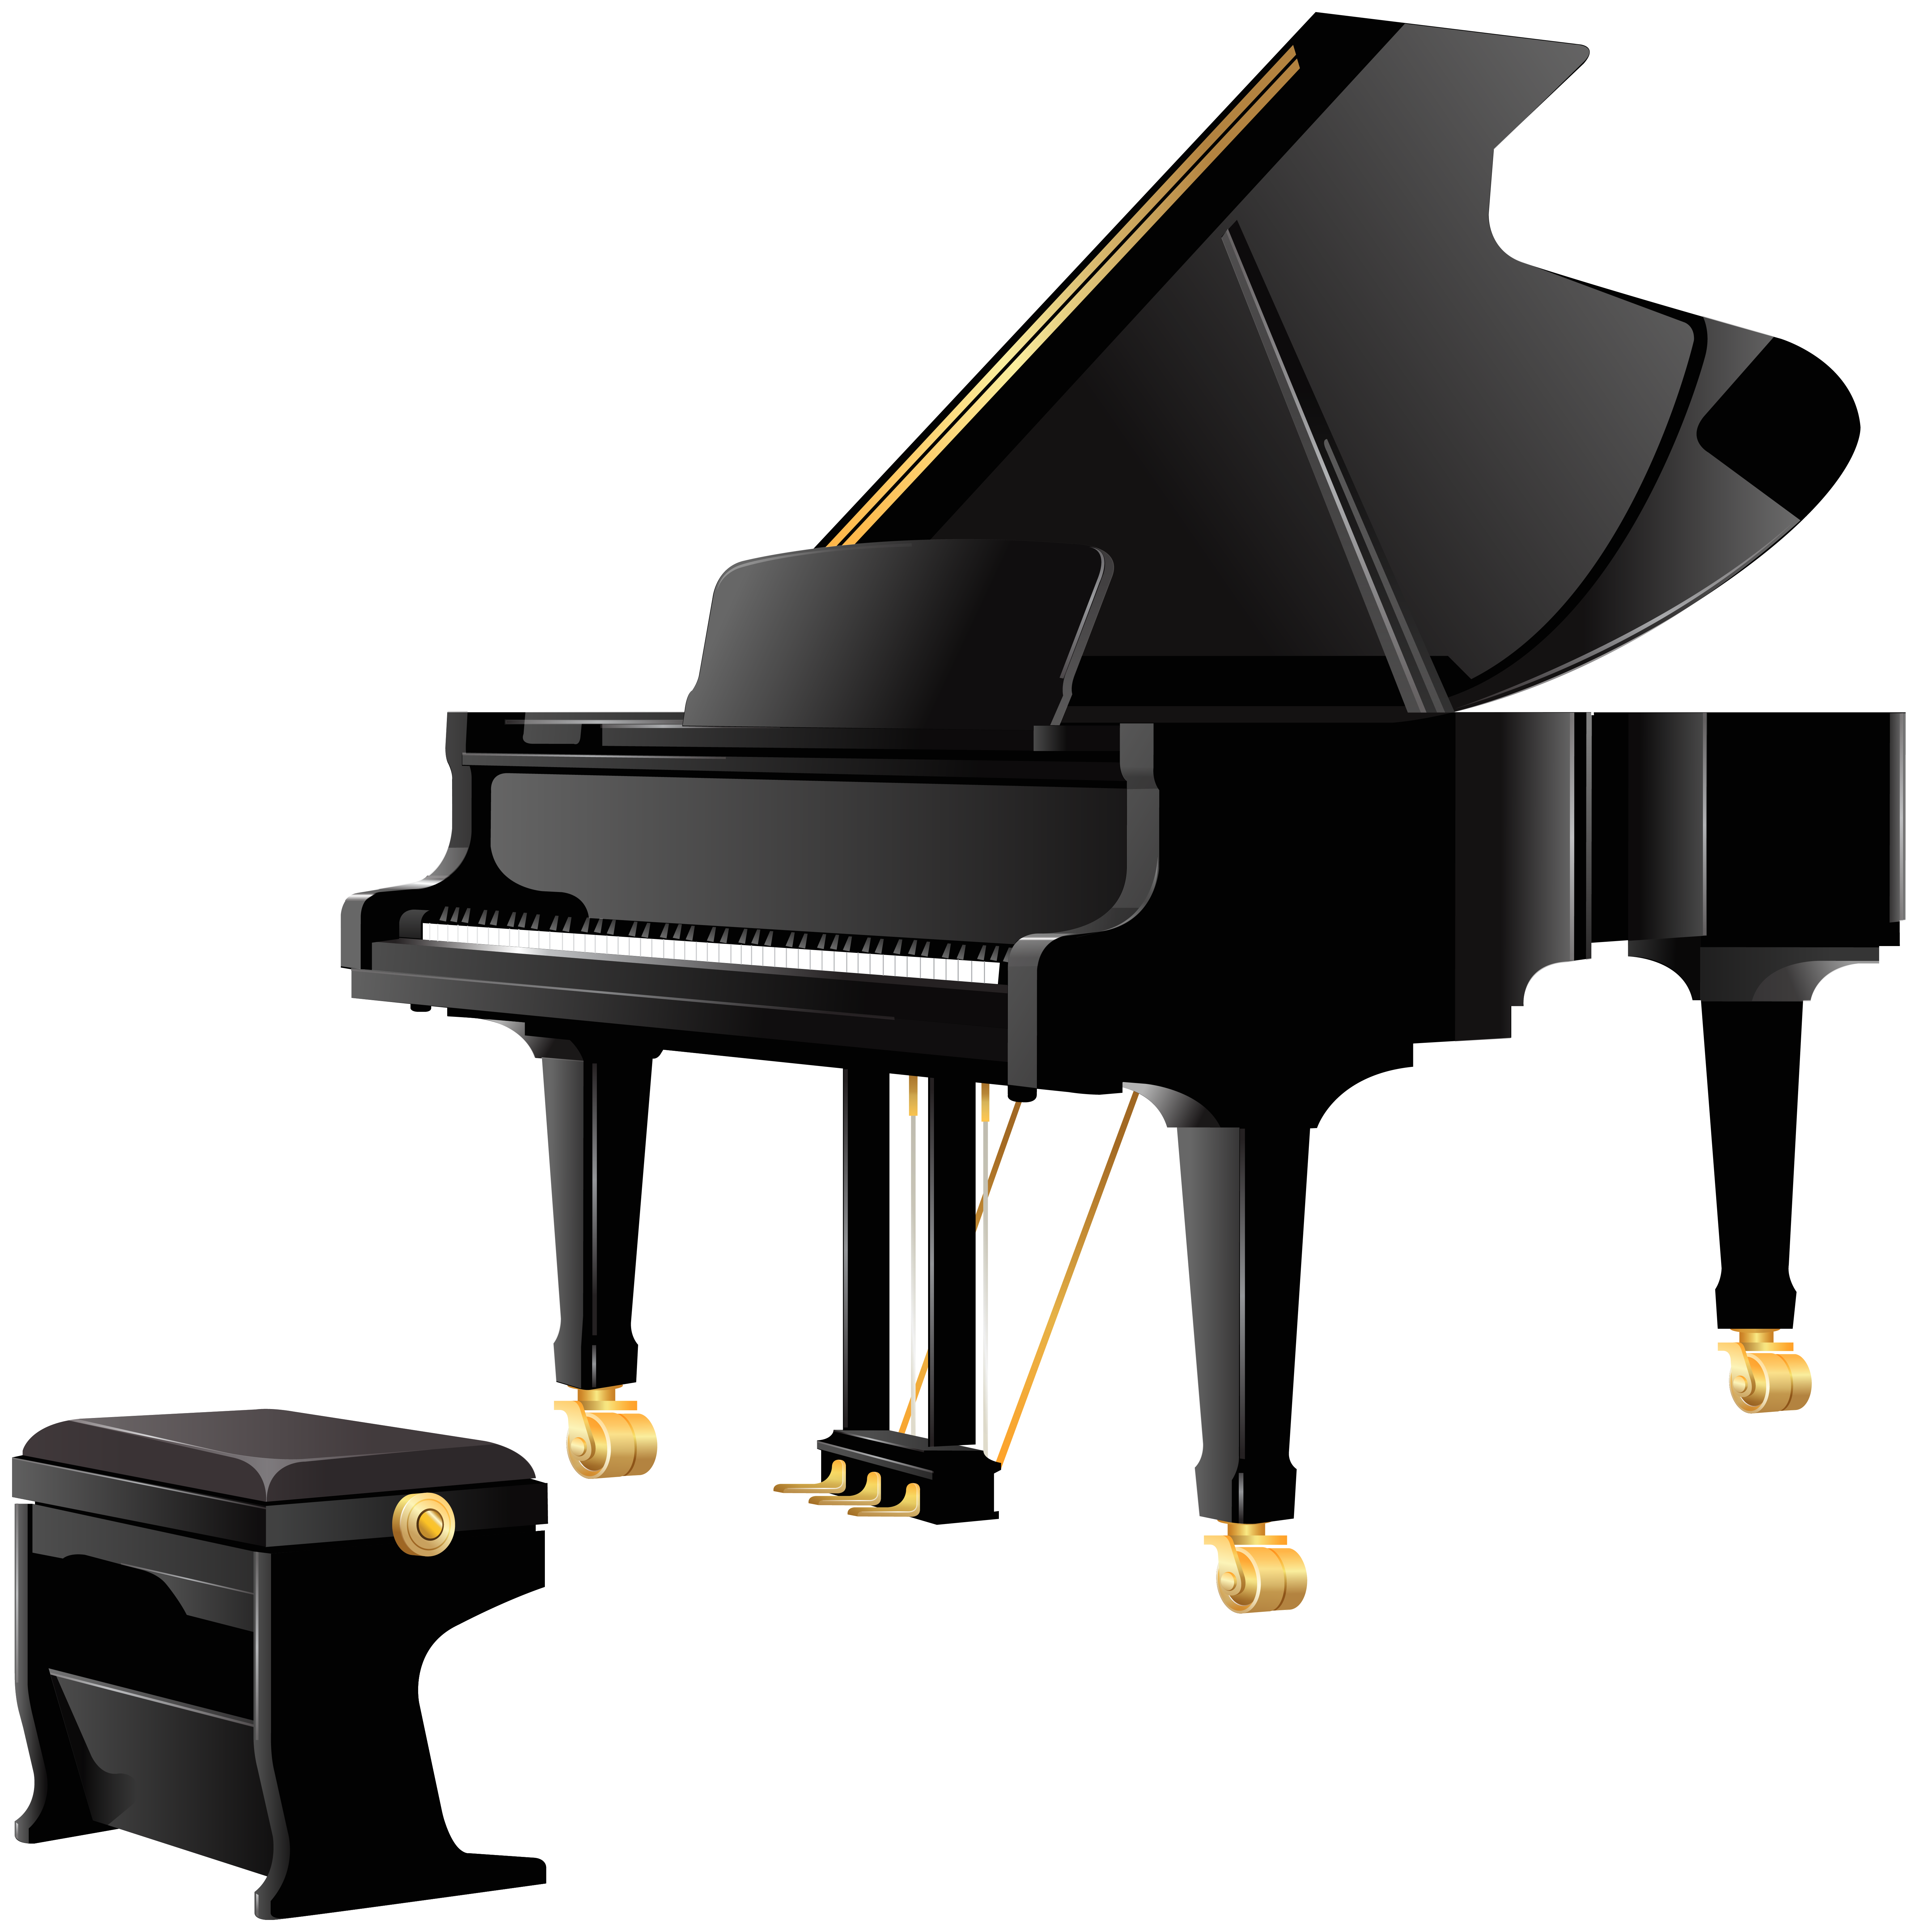 Royal grand png best. Hands clipart piano